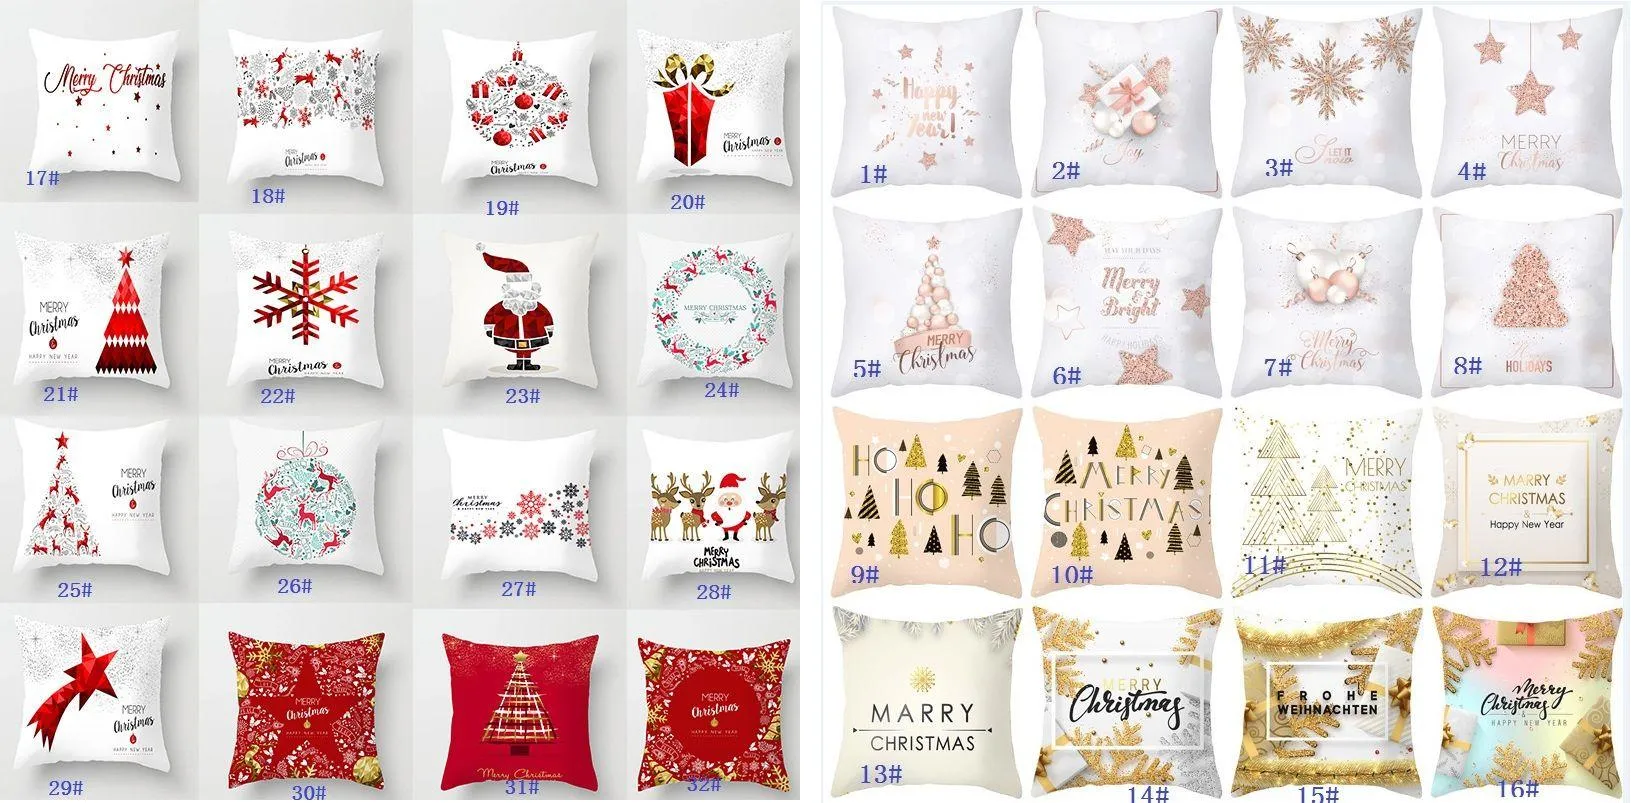 Merry Christmas Pillow case Cover Cushion Pillowcases Christmas Decorations For Home elk Snowflake Santa Claus Happy New Year Decor Gift HH22-301